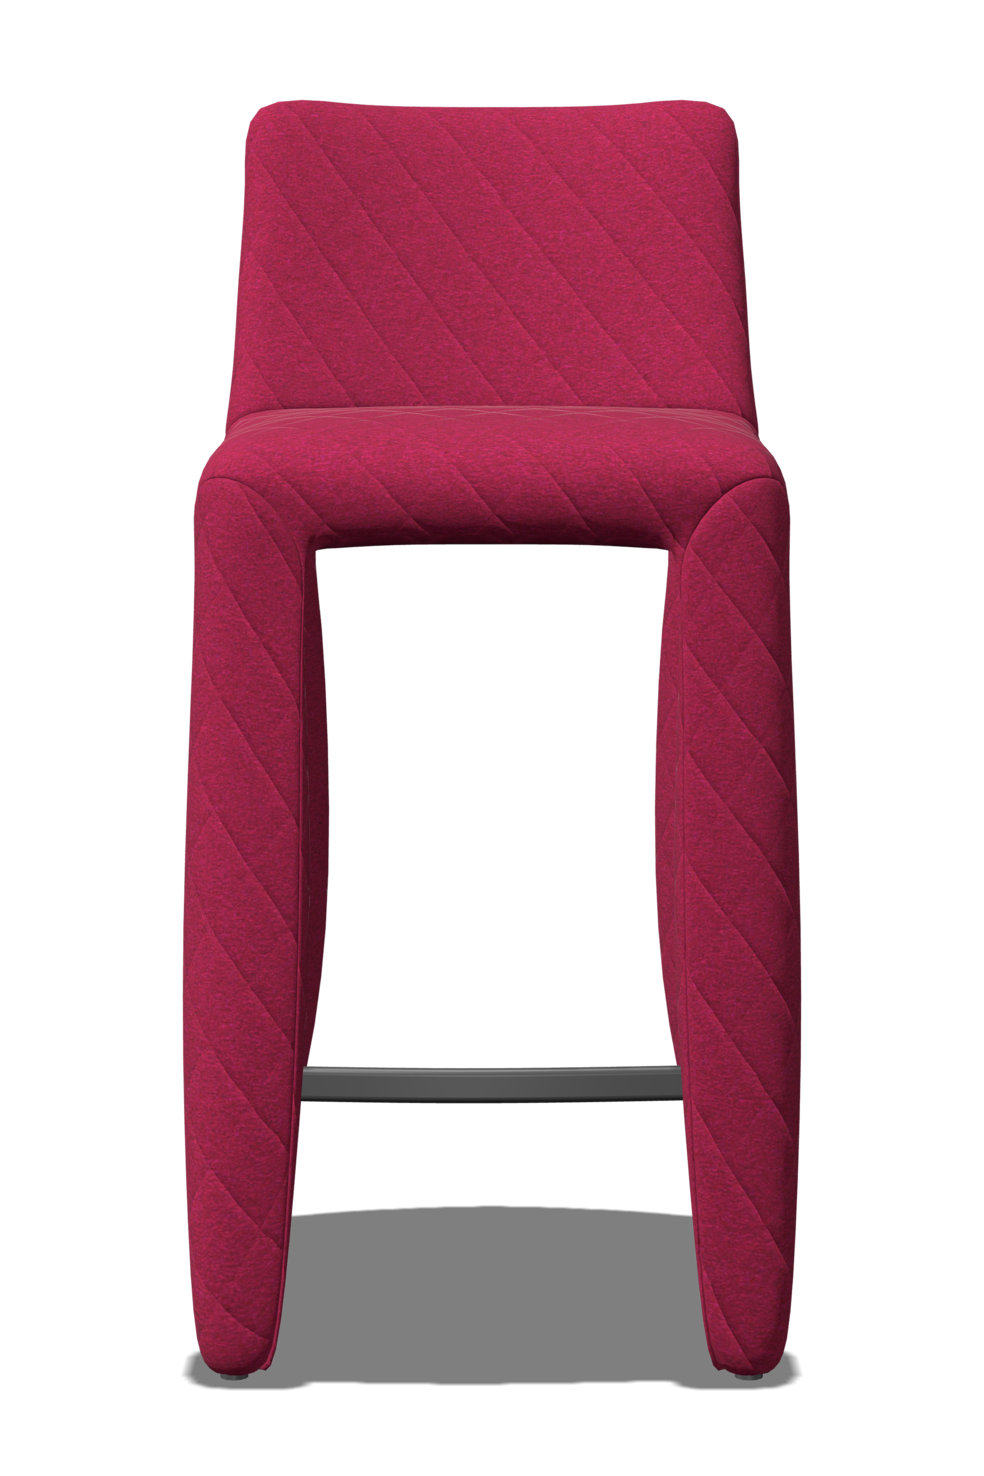 Monster Barstool low stitching pink